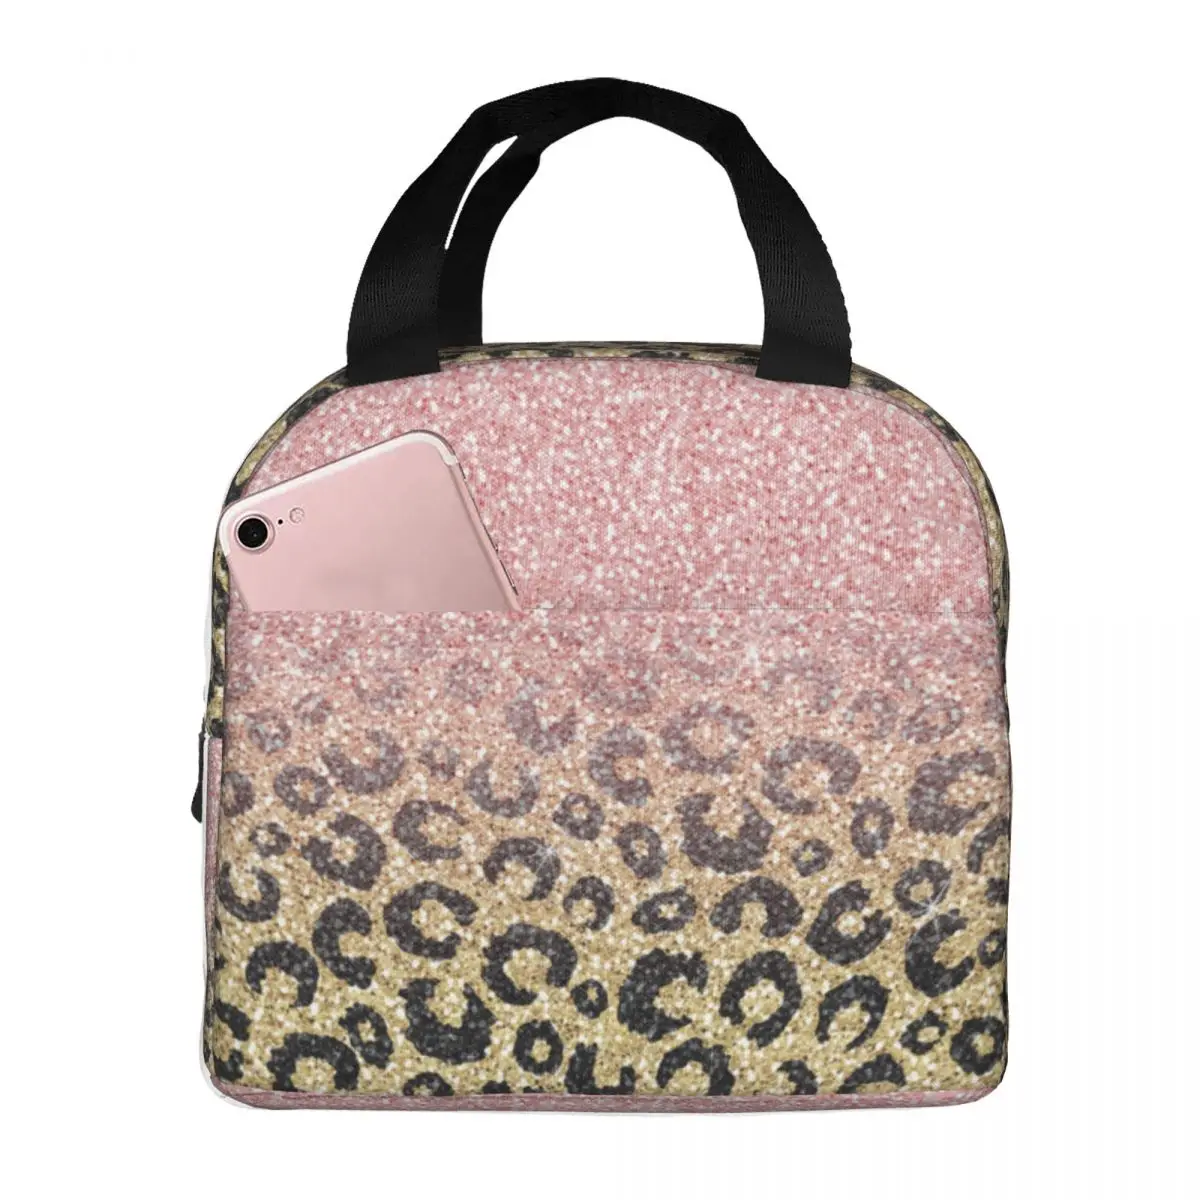 Rose Gold Glitter Black Leopard Lunch Bag Portable Insulated Oxford Cooler Bags Thermal Picnic Work Tote for Women Kids